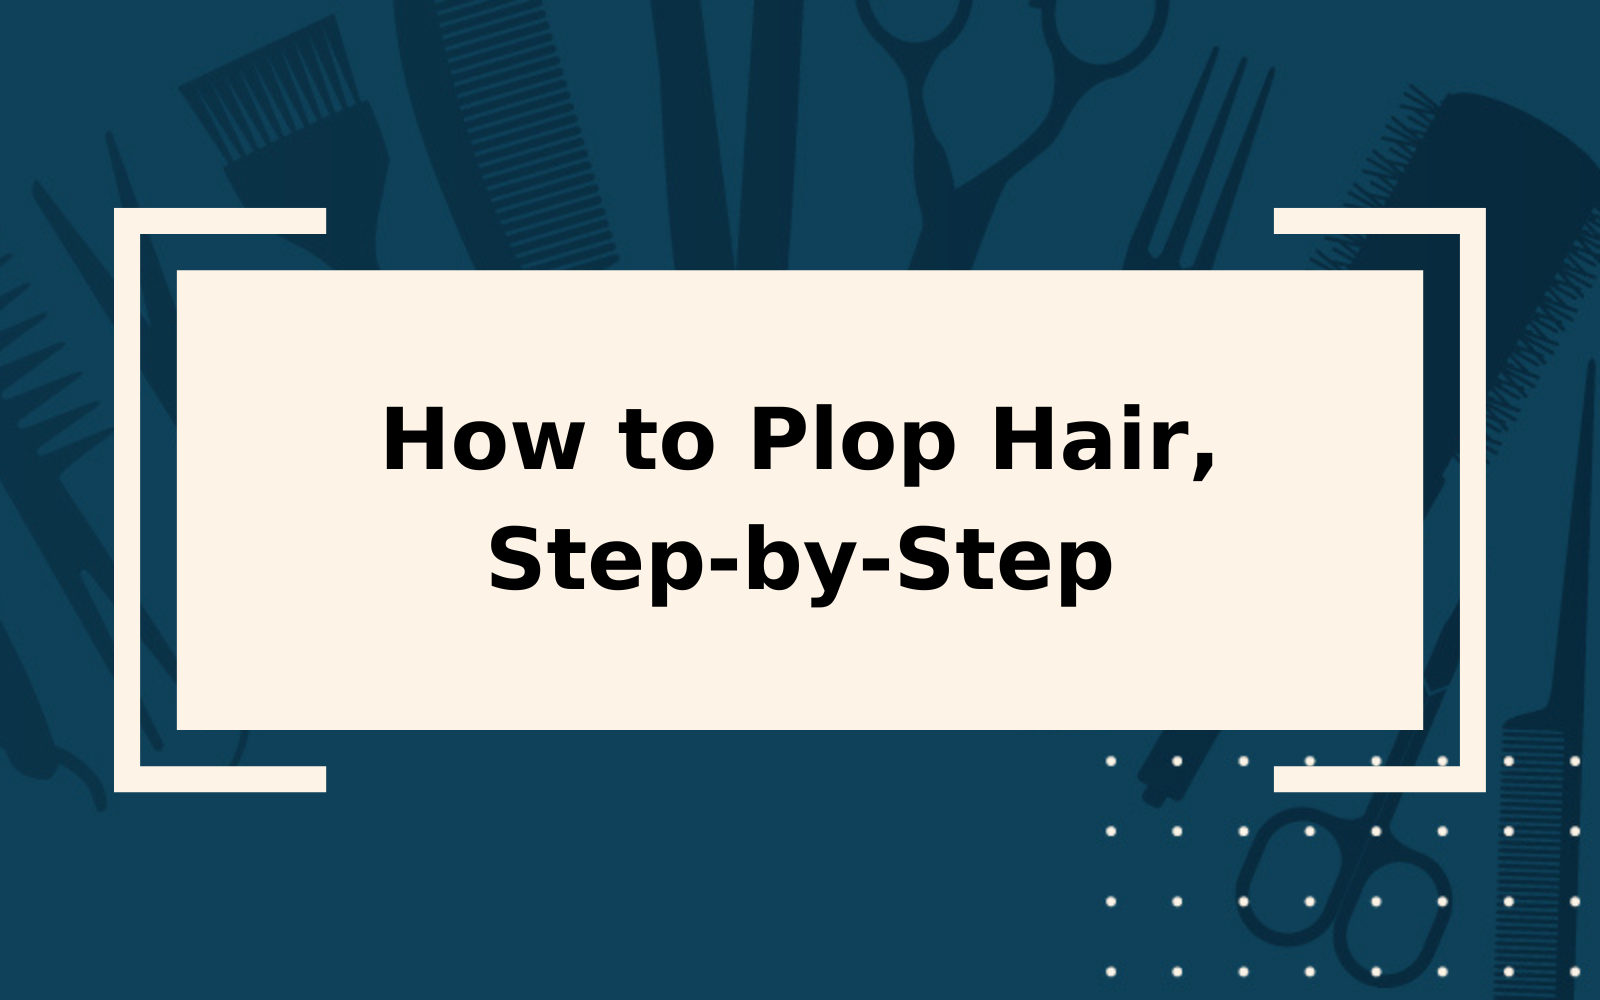 How to Plop Hair | Step-by-Step Guide & Things to Consider